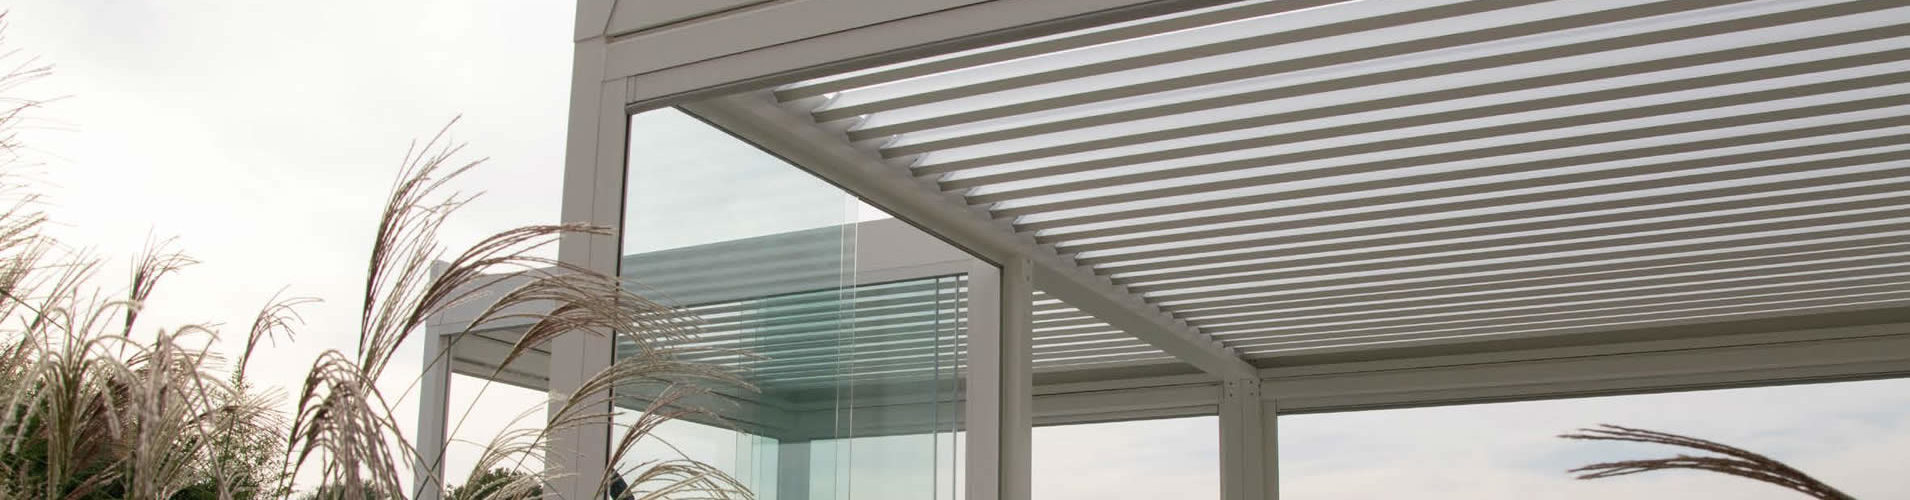 Sarasota Louvered Roofs, Motorized Porch & Patio Covers, Naples FL